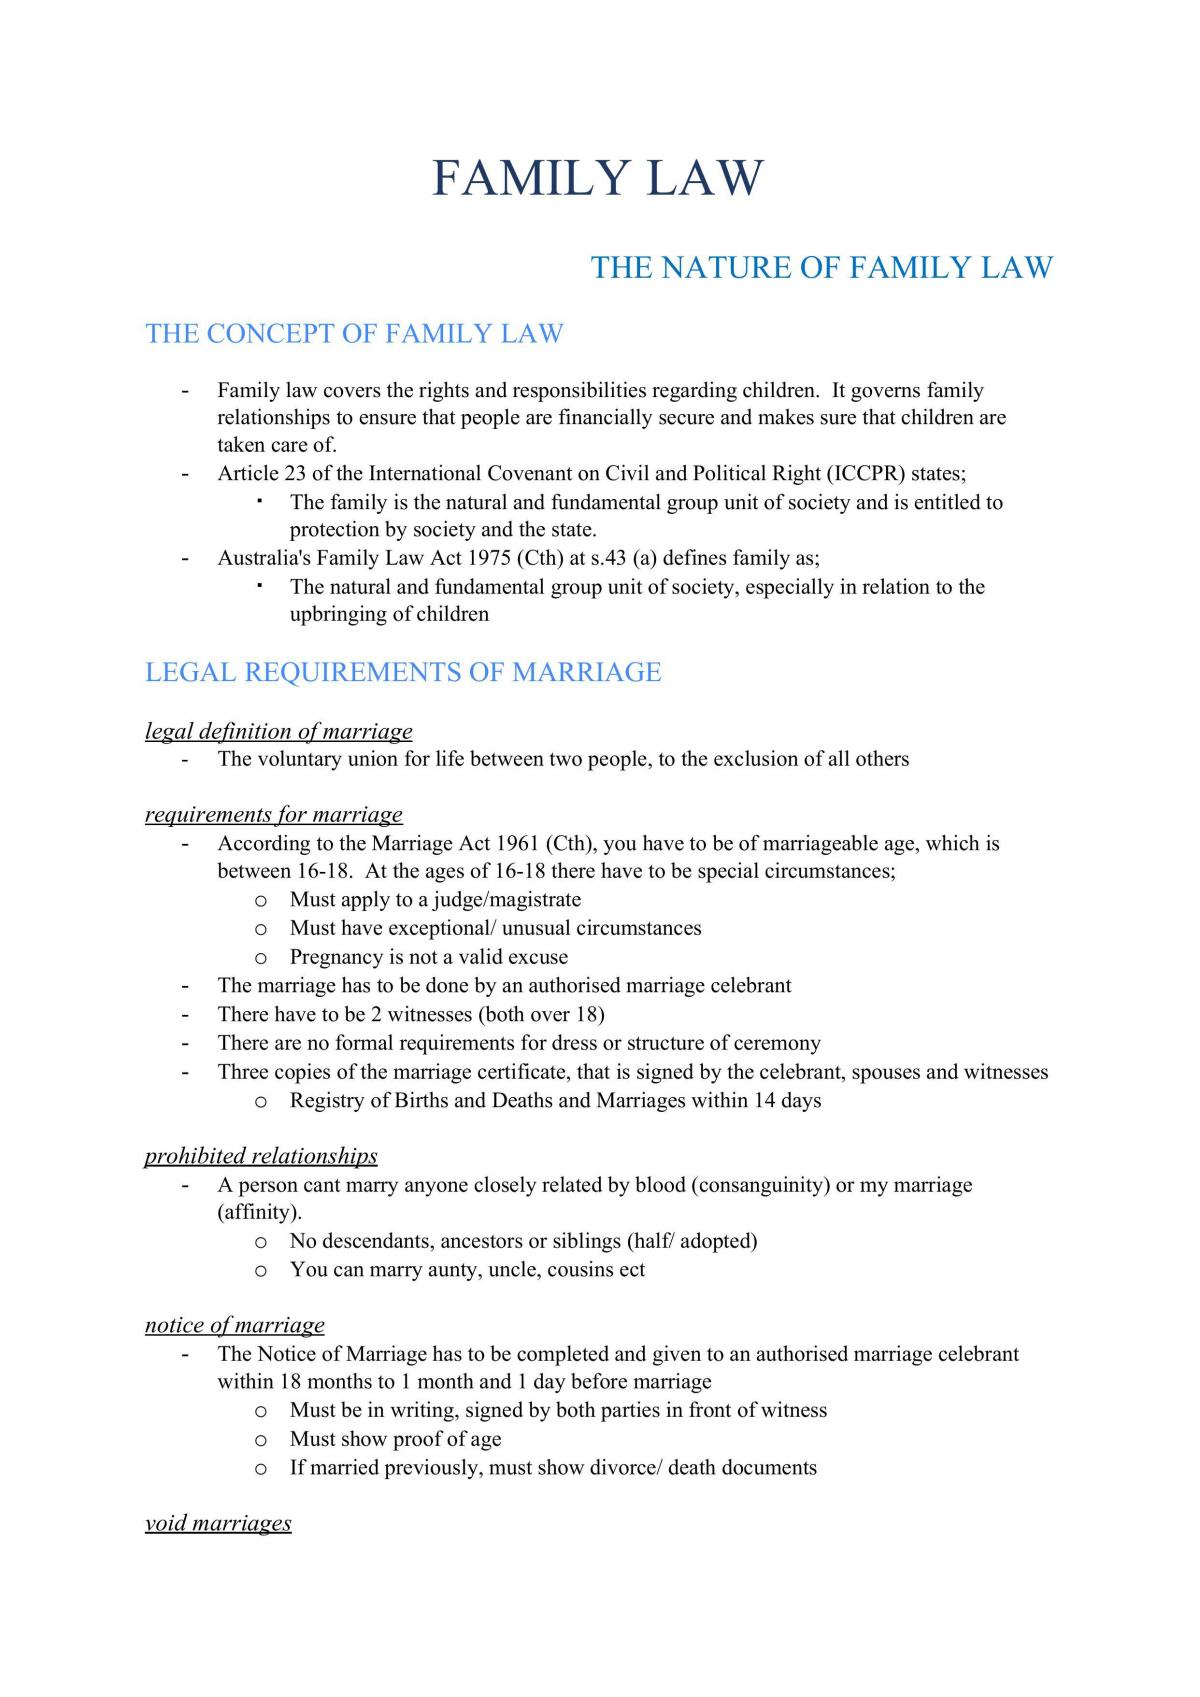 literature review on family law